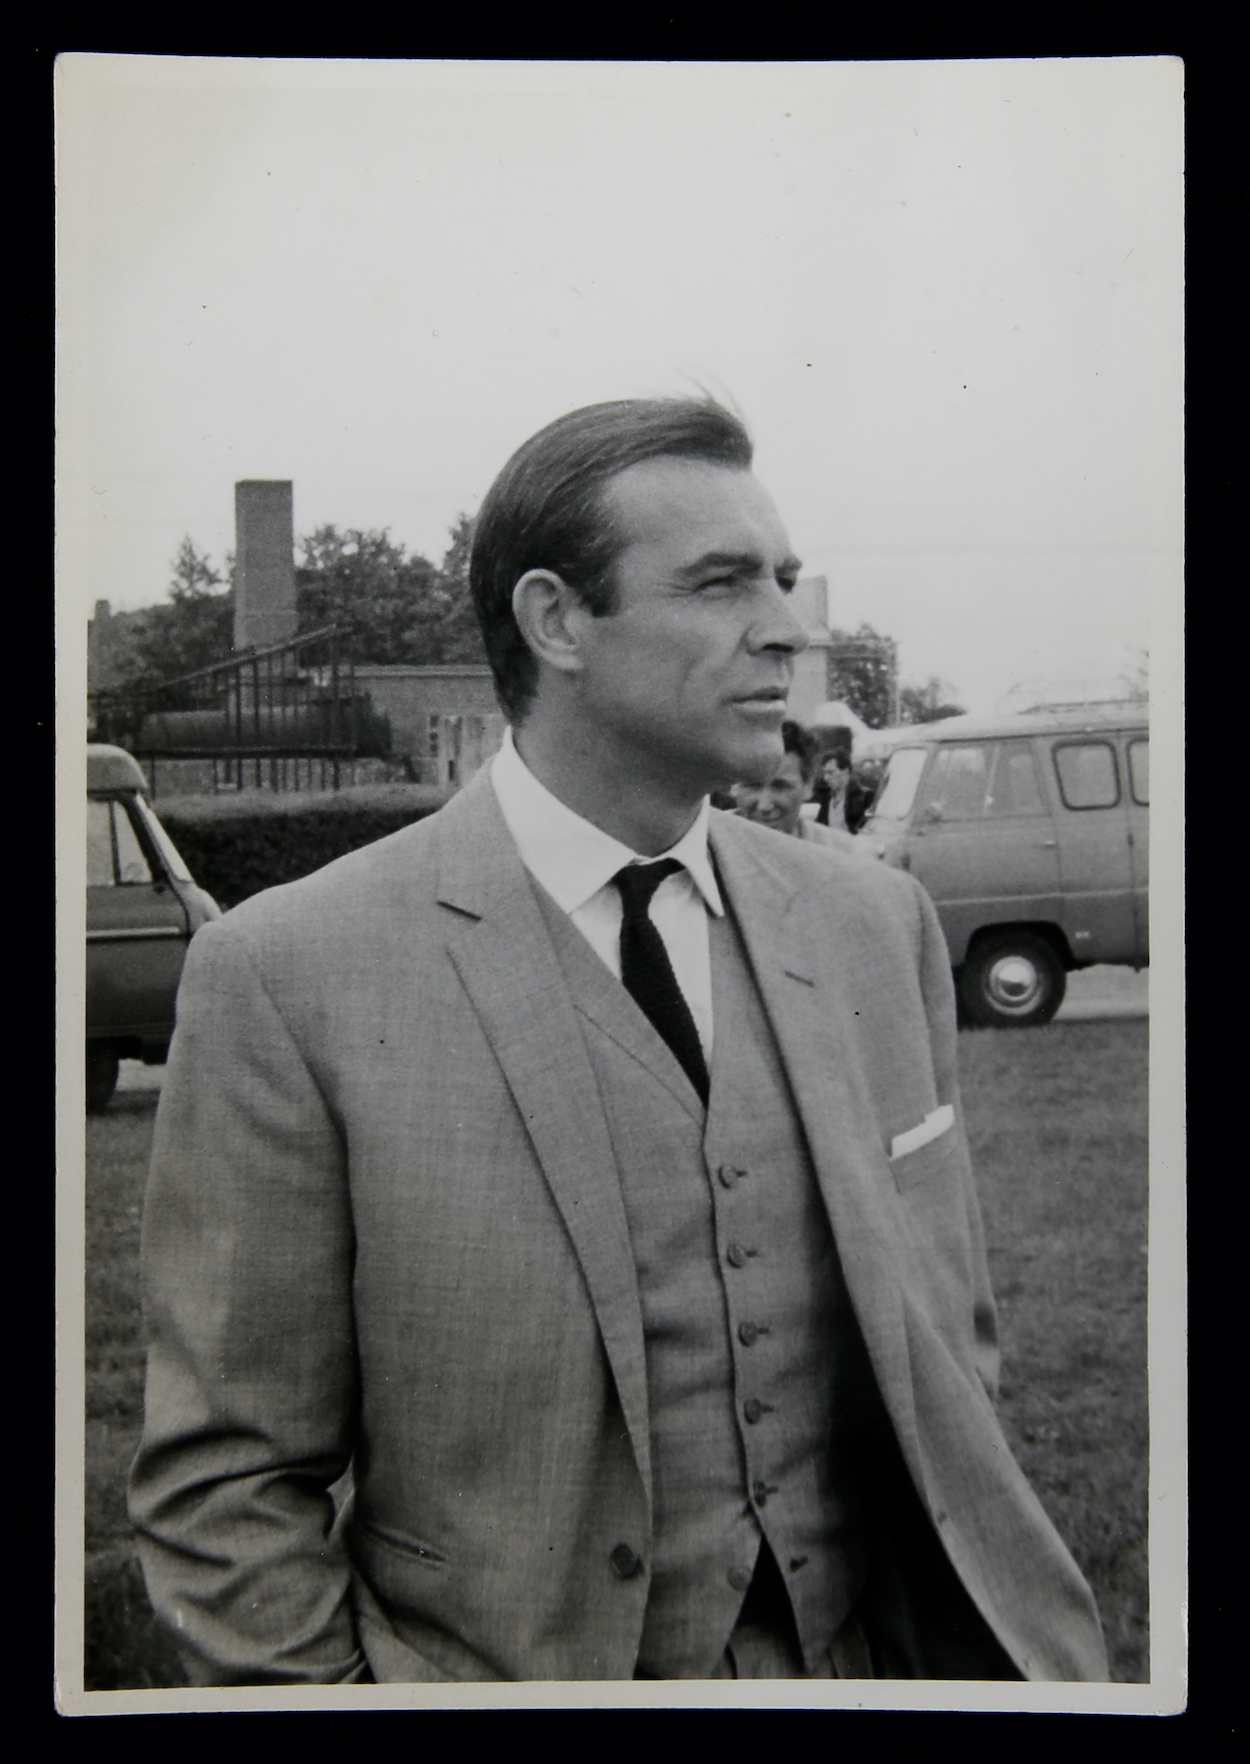 A photograph of Sean Connery as James Bond in Goldfinger